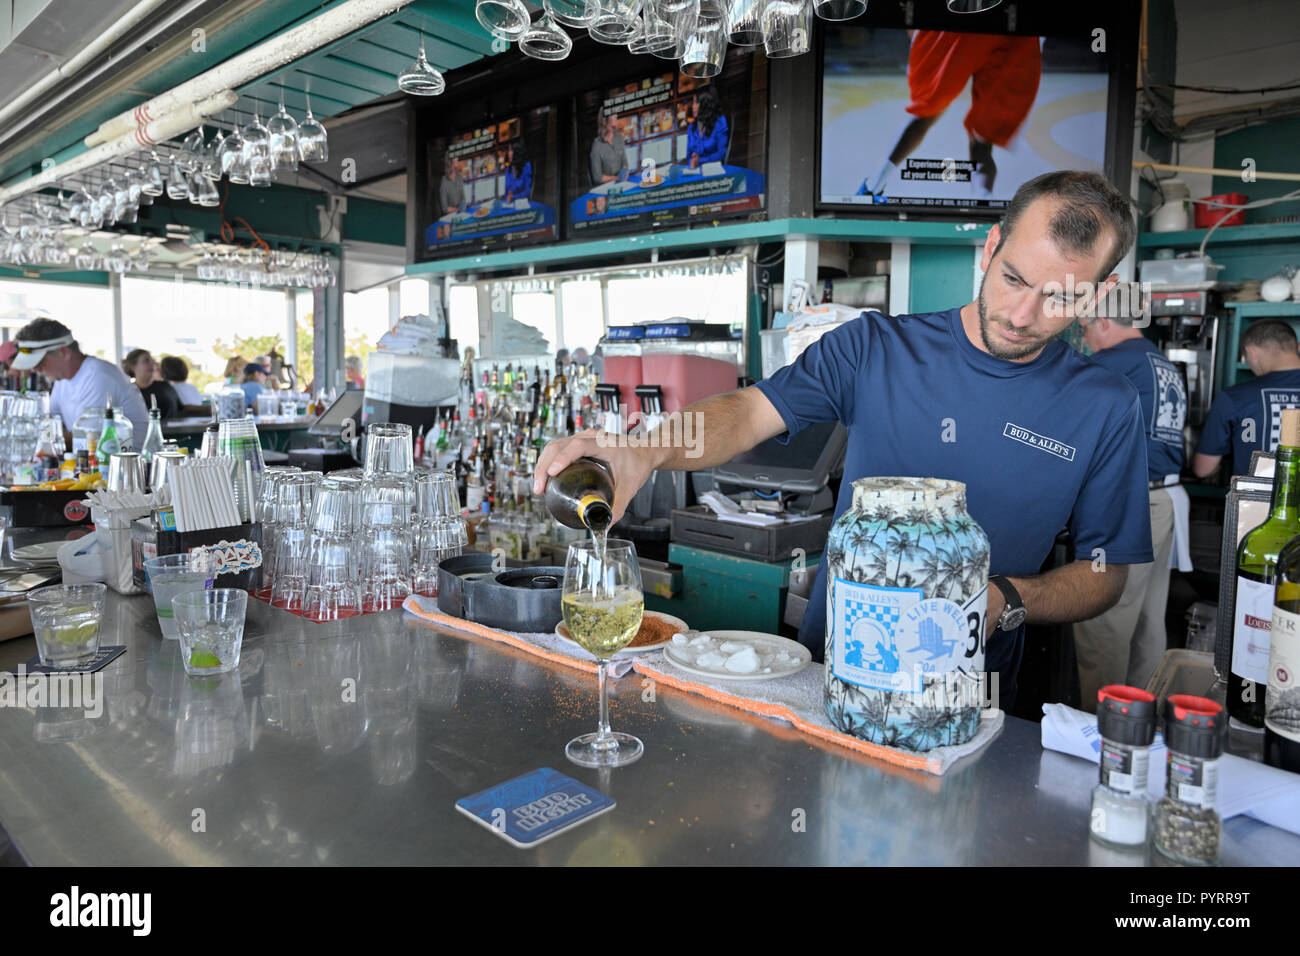 Male bartender pouring a glass of white wine at Bud and Alley's Bar and Grill rooftop restaurant in Seaside Florida, USA. Stock Photo